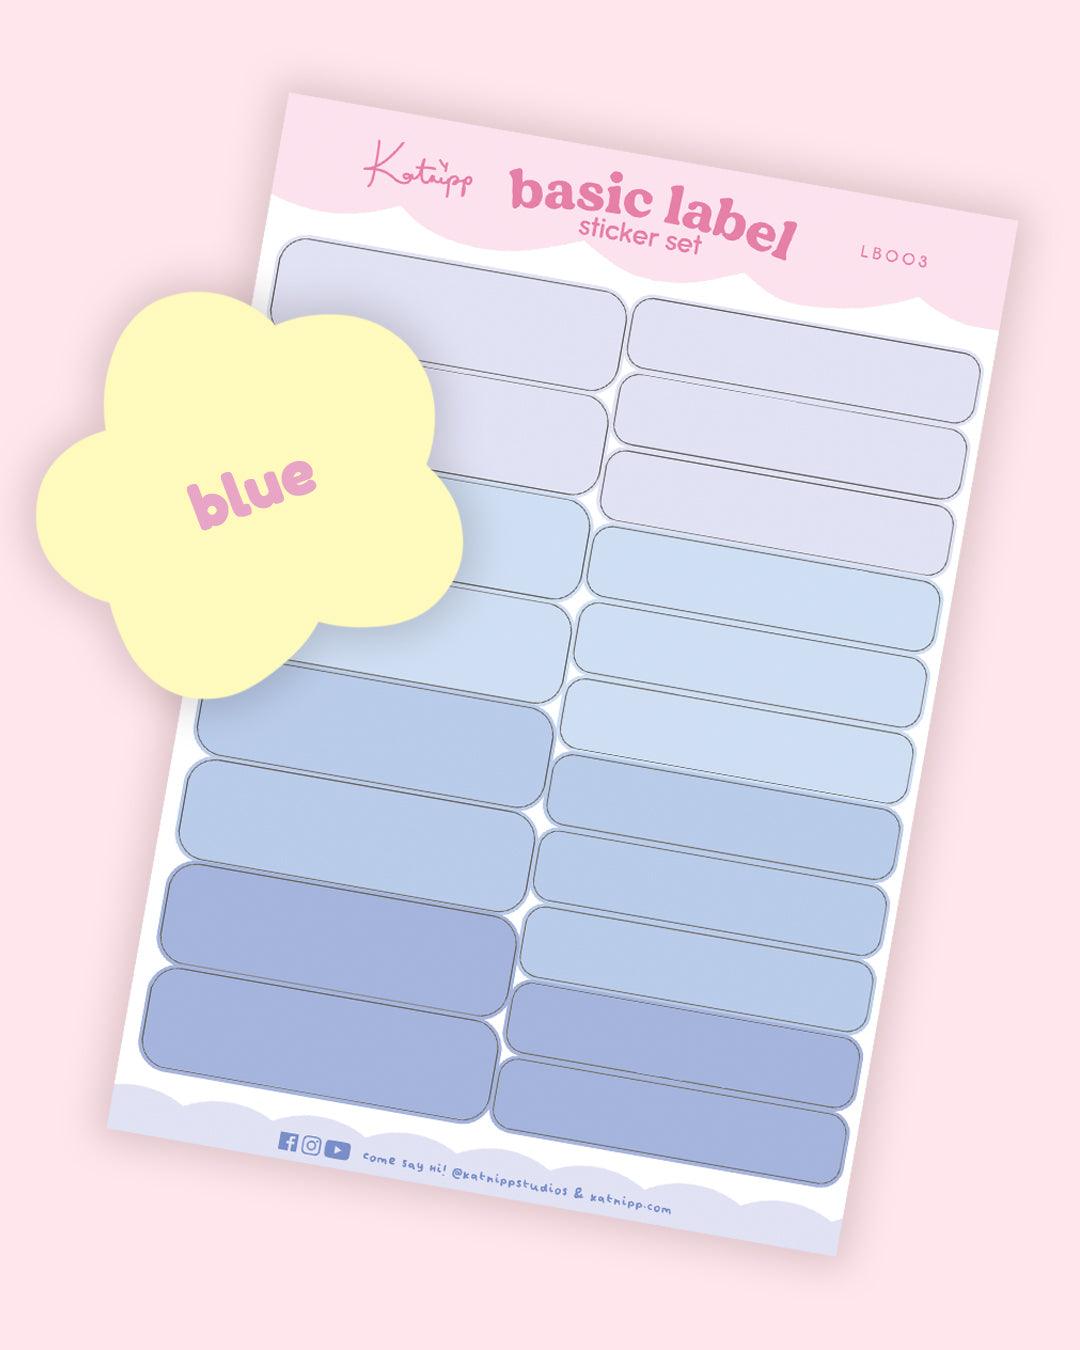 Charming Organisation Label Stickers with vibrant designs, ideal for decluttering and categorising your space. 7